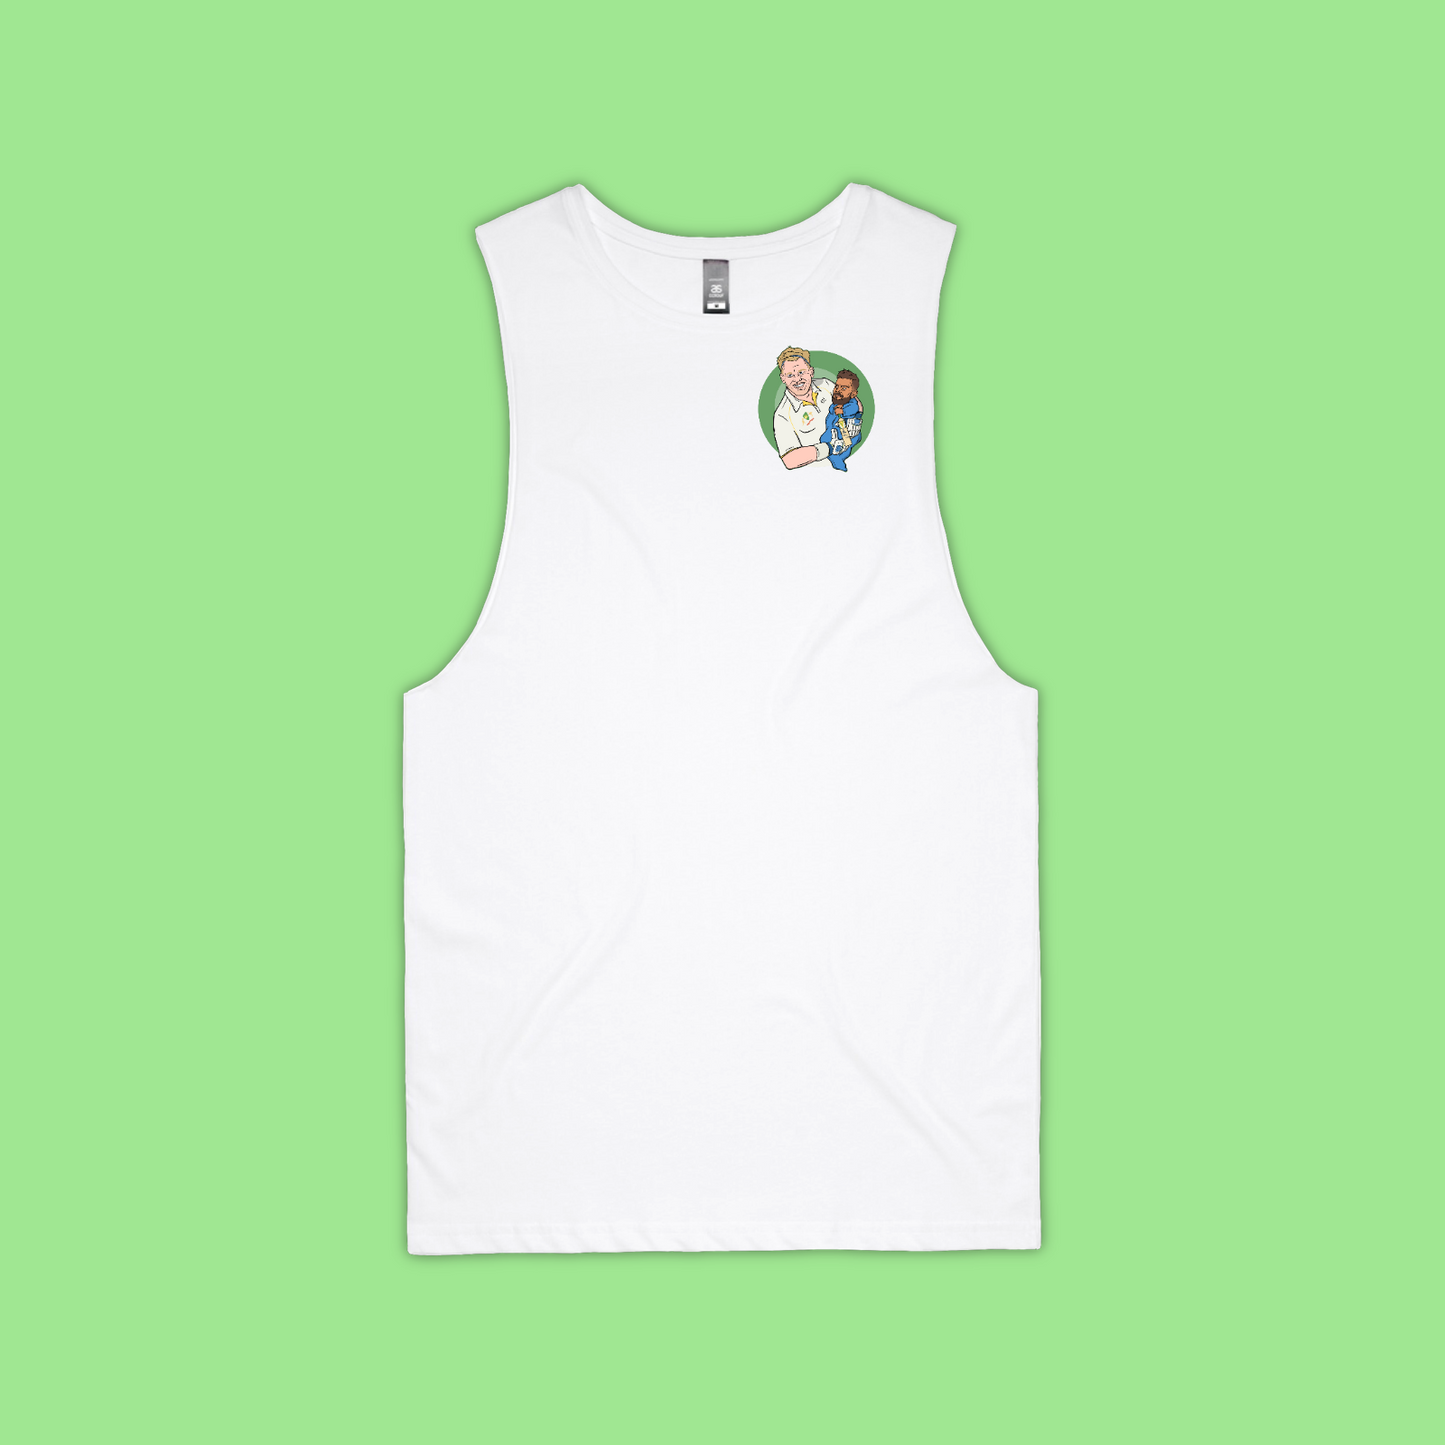 ALWAYS FATHER TANK - WHITE FRONT AND BACK